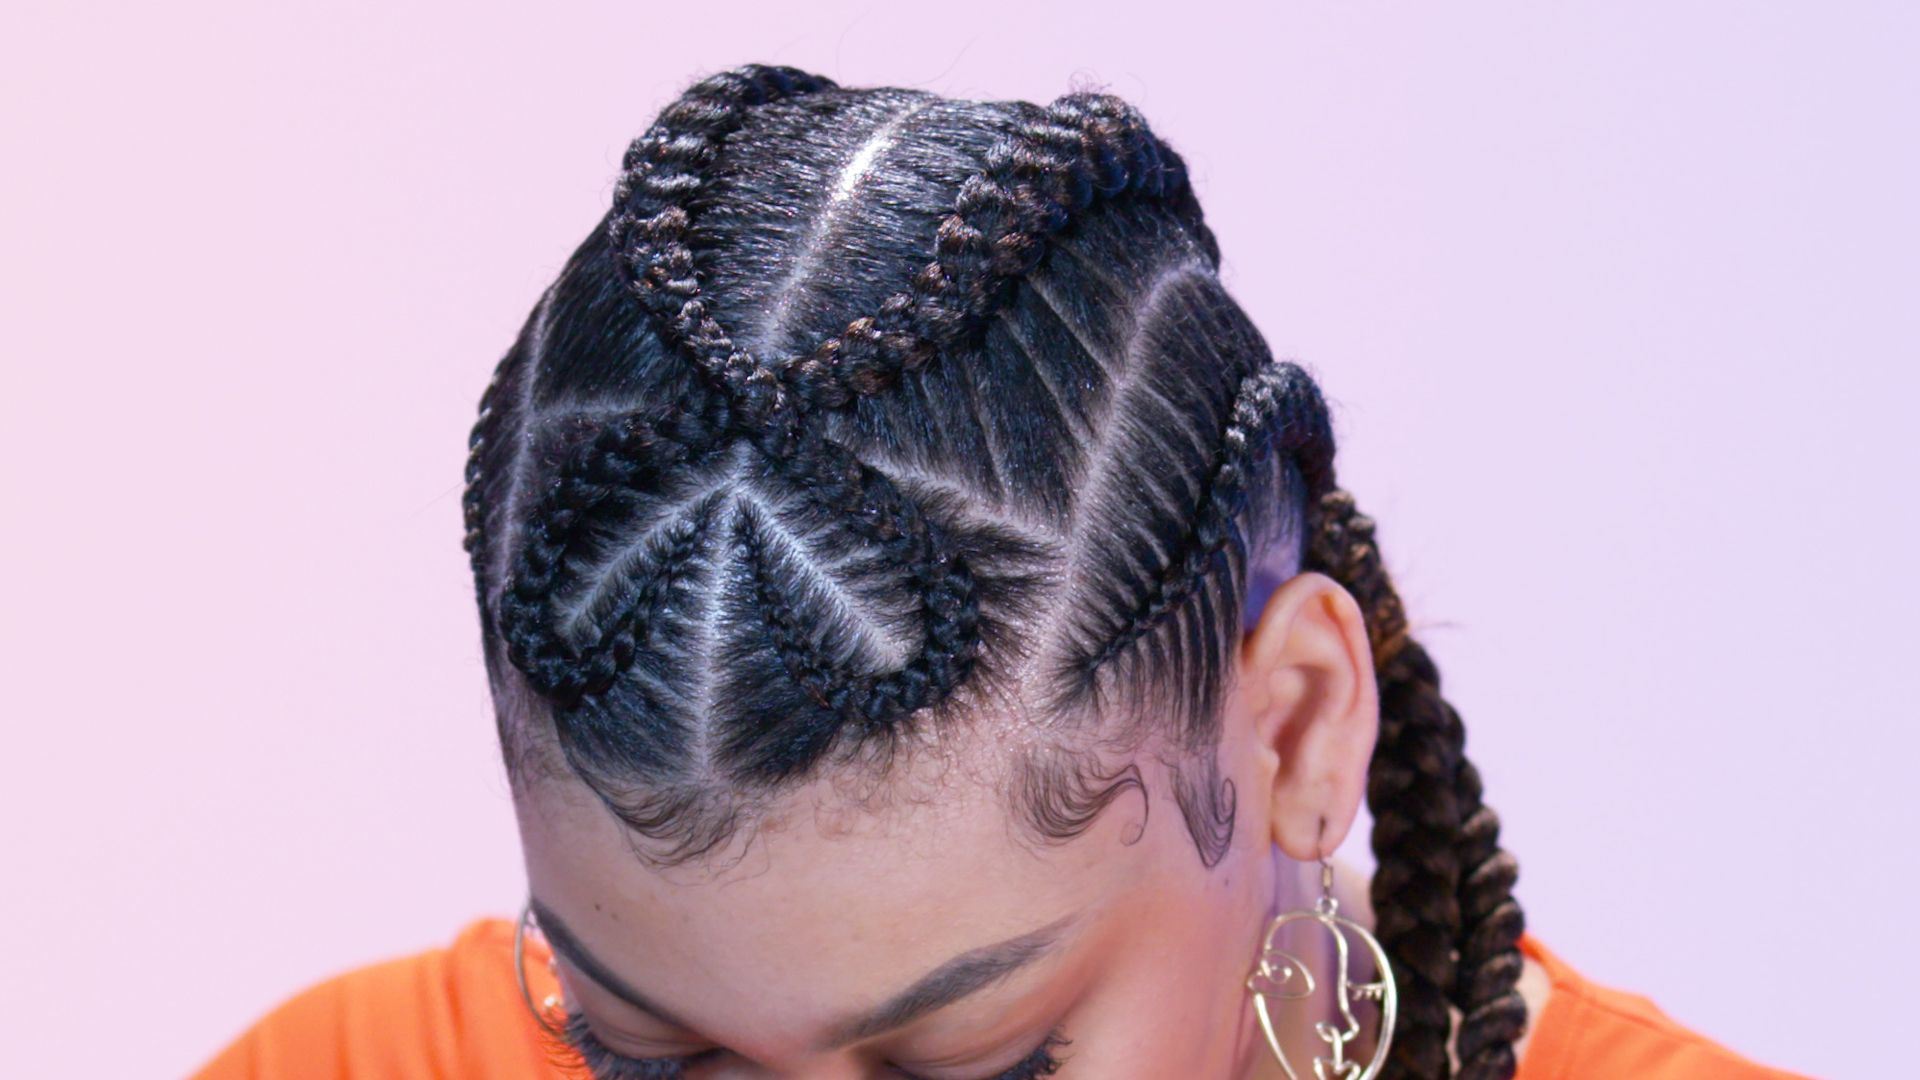 21 Braided Hairstyles You Need to Try Next  Girls hairstyles braids,  Braided cornrow hairstyles, Half braided hairstyles